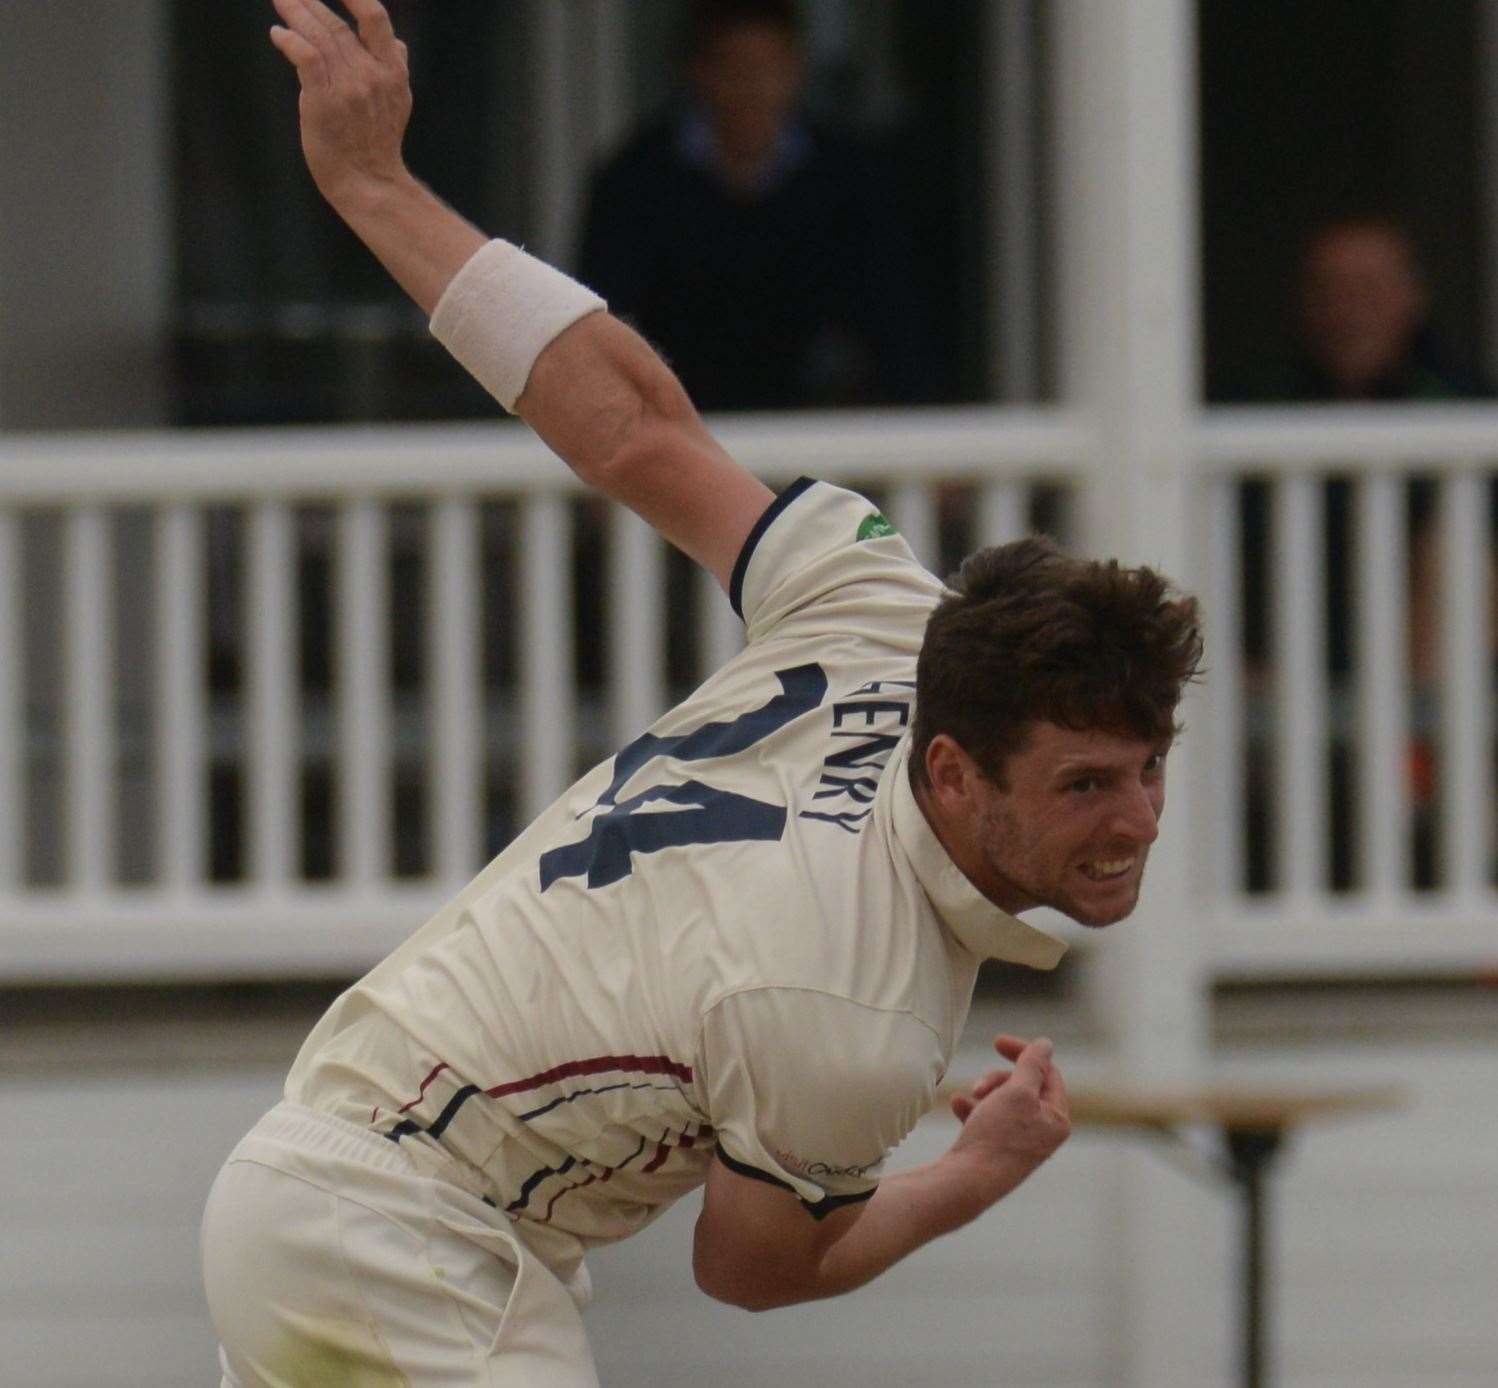 Matt Henry took 75 championship wickets for Kent during the 2018 season Picture: Chris Davey